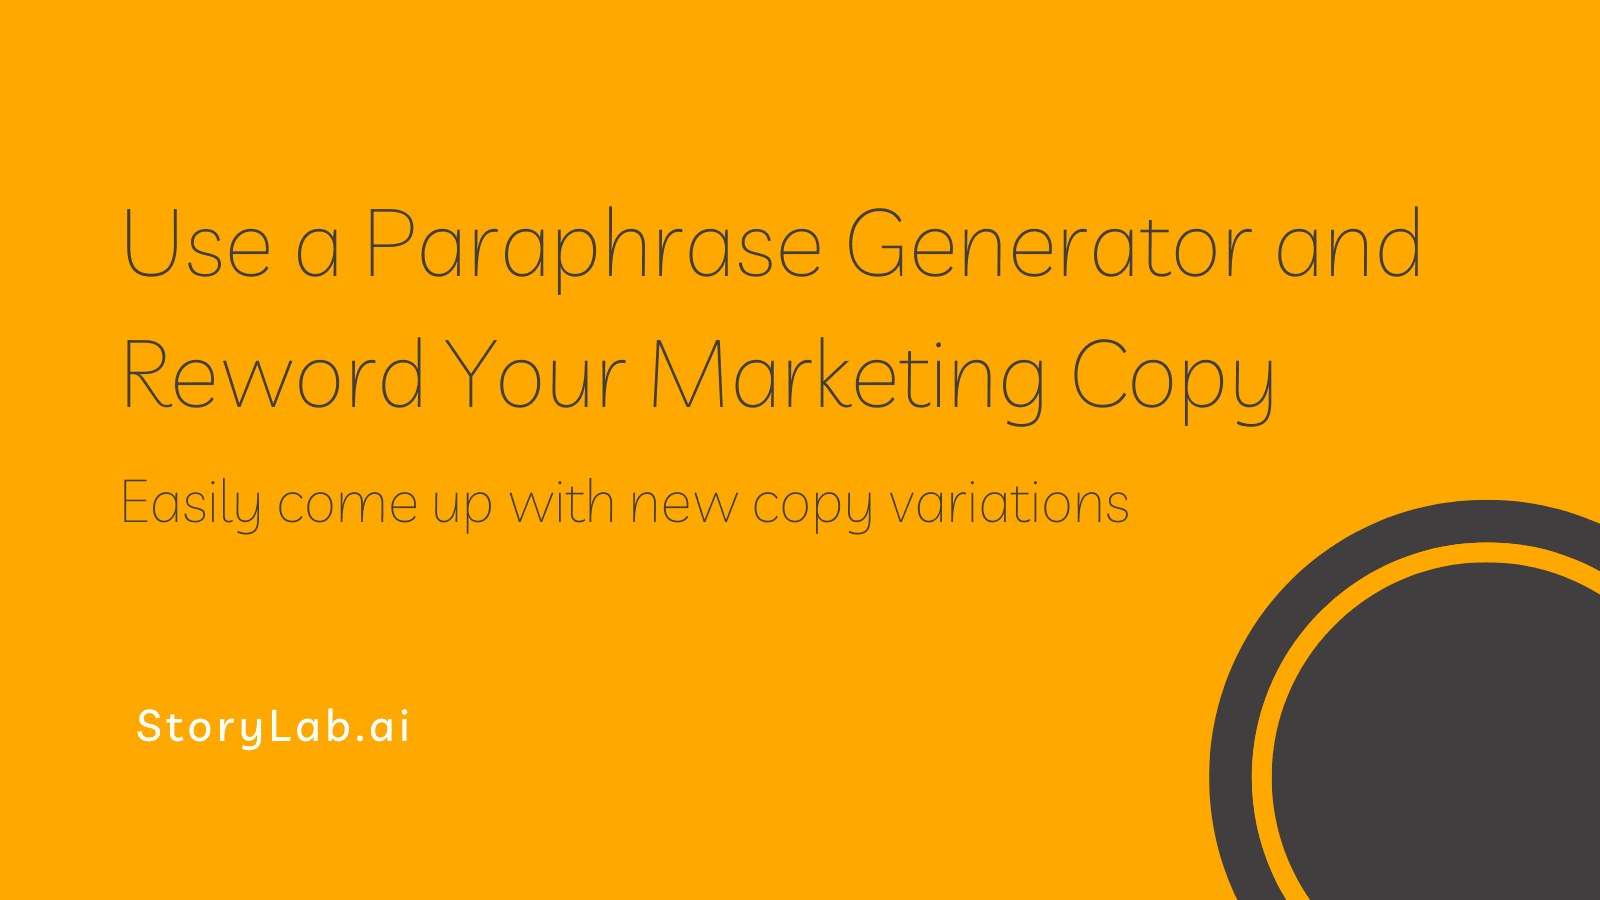 Use a Paraphrase Generator and Reword Your Marketing Copy